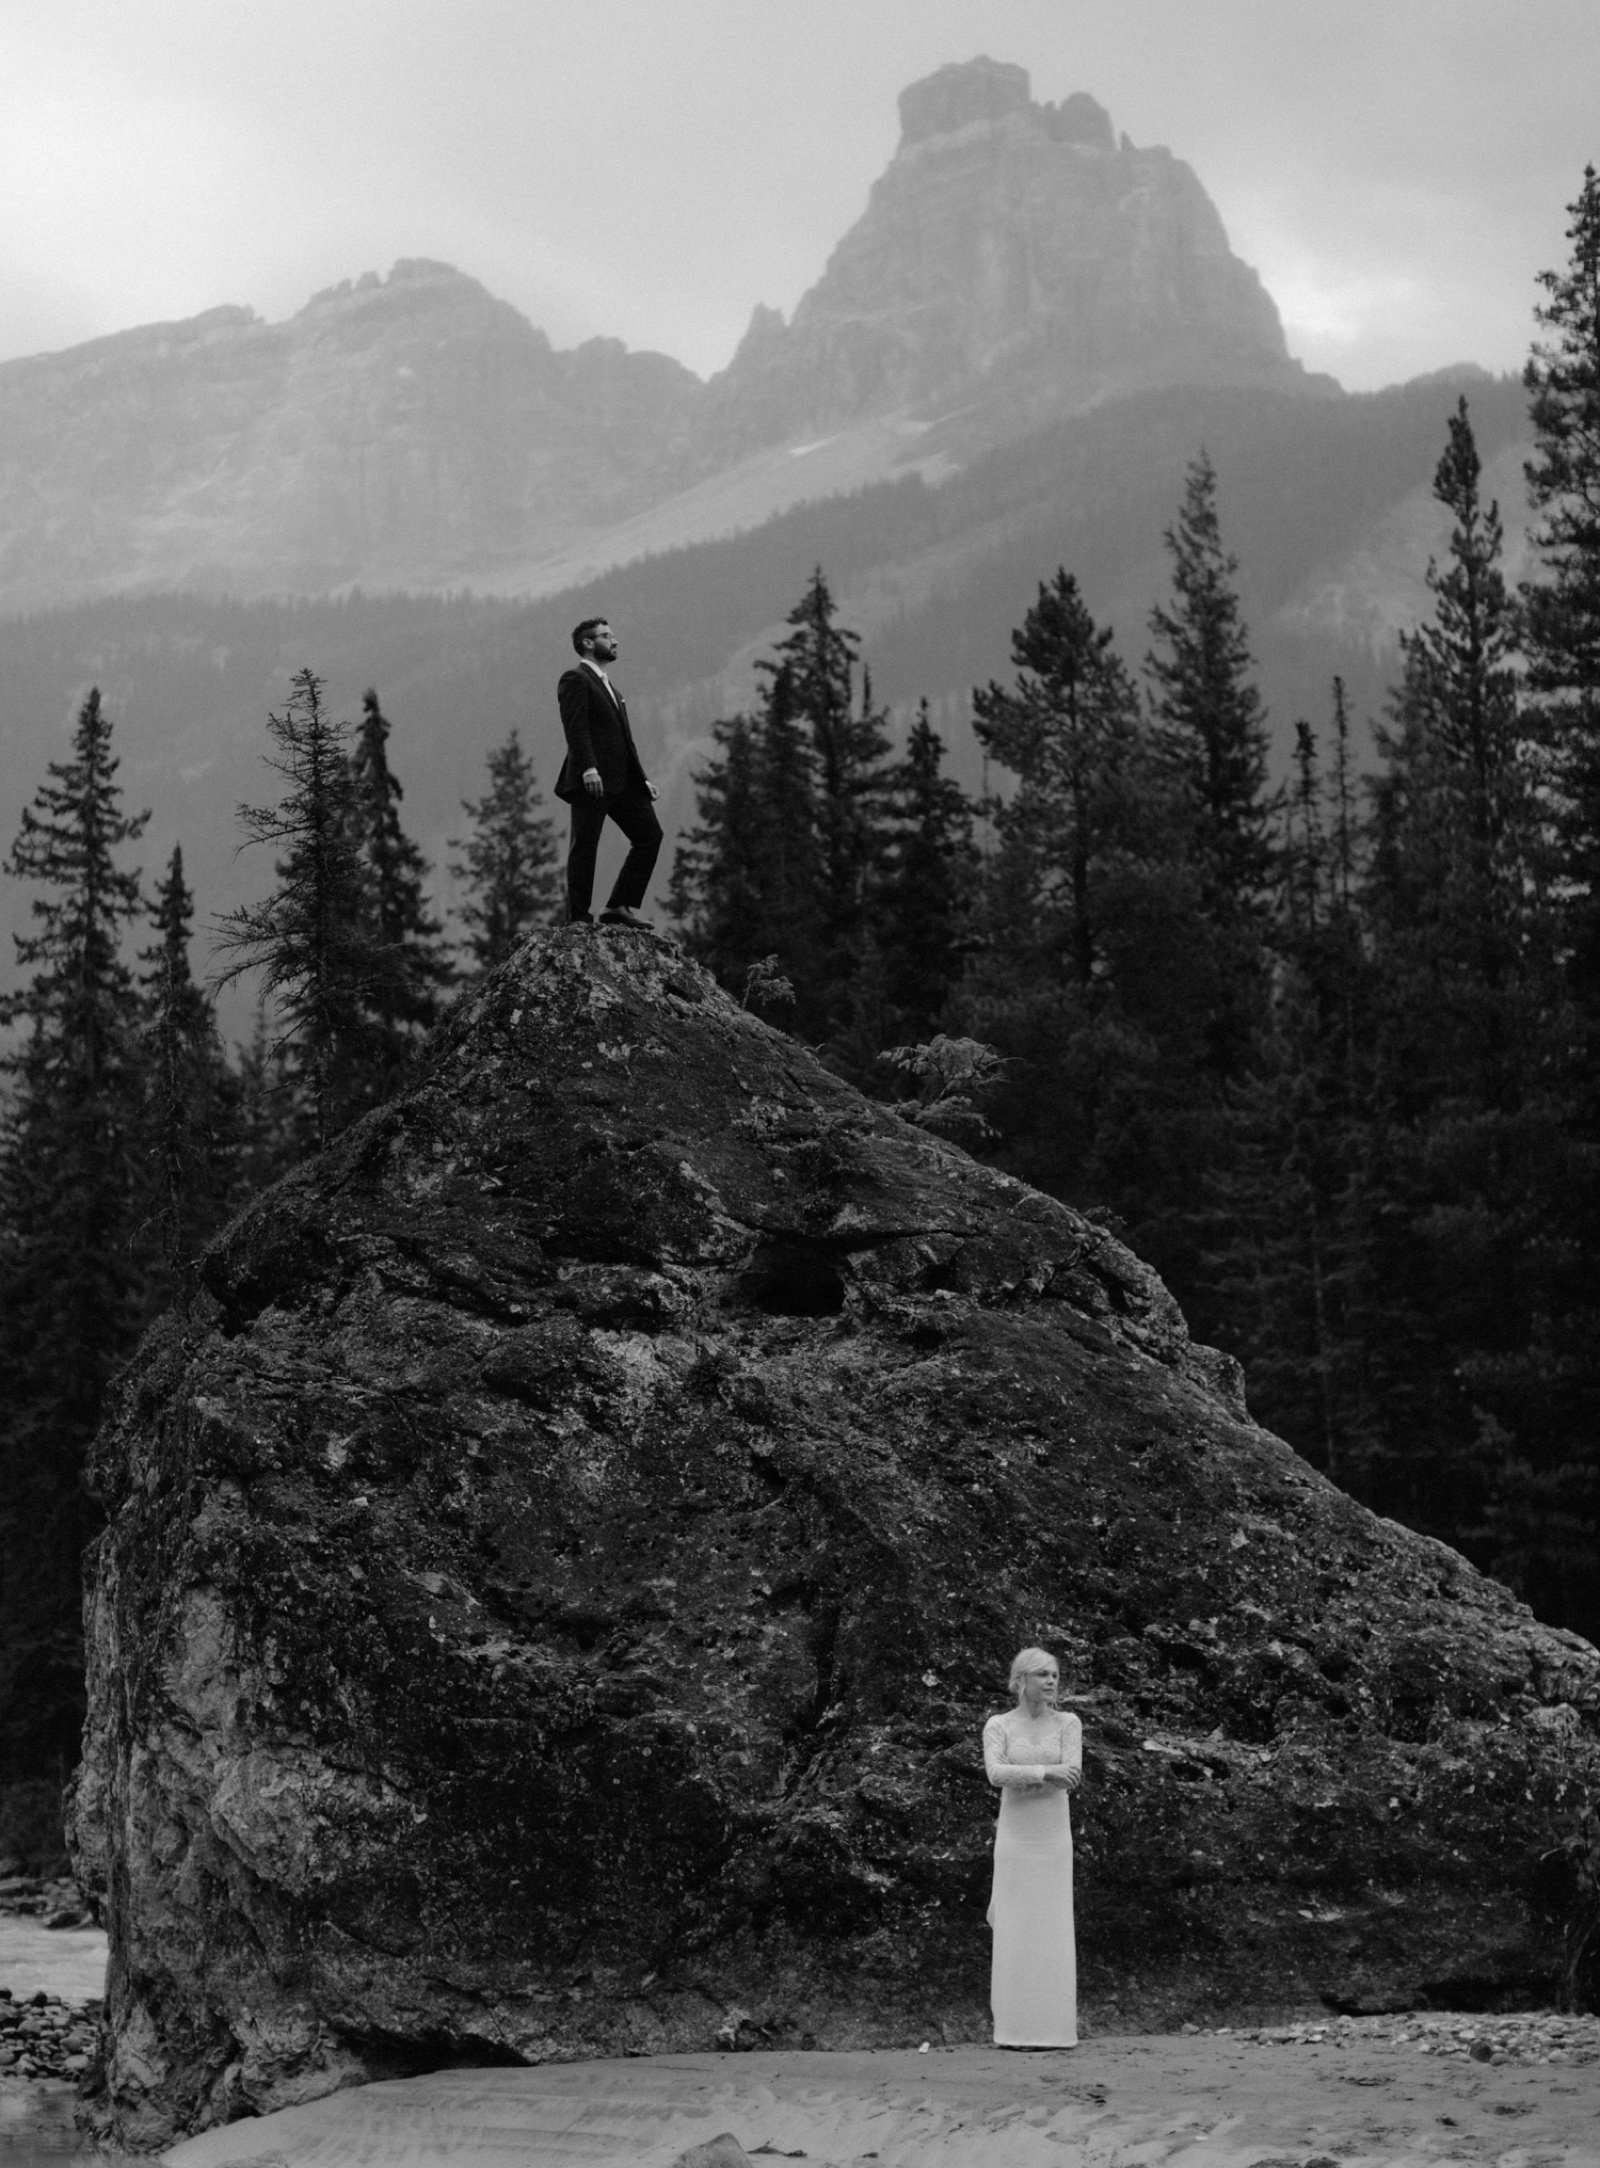 Groom climbing on a large boulder with a mountainous backdrop